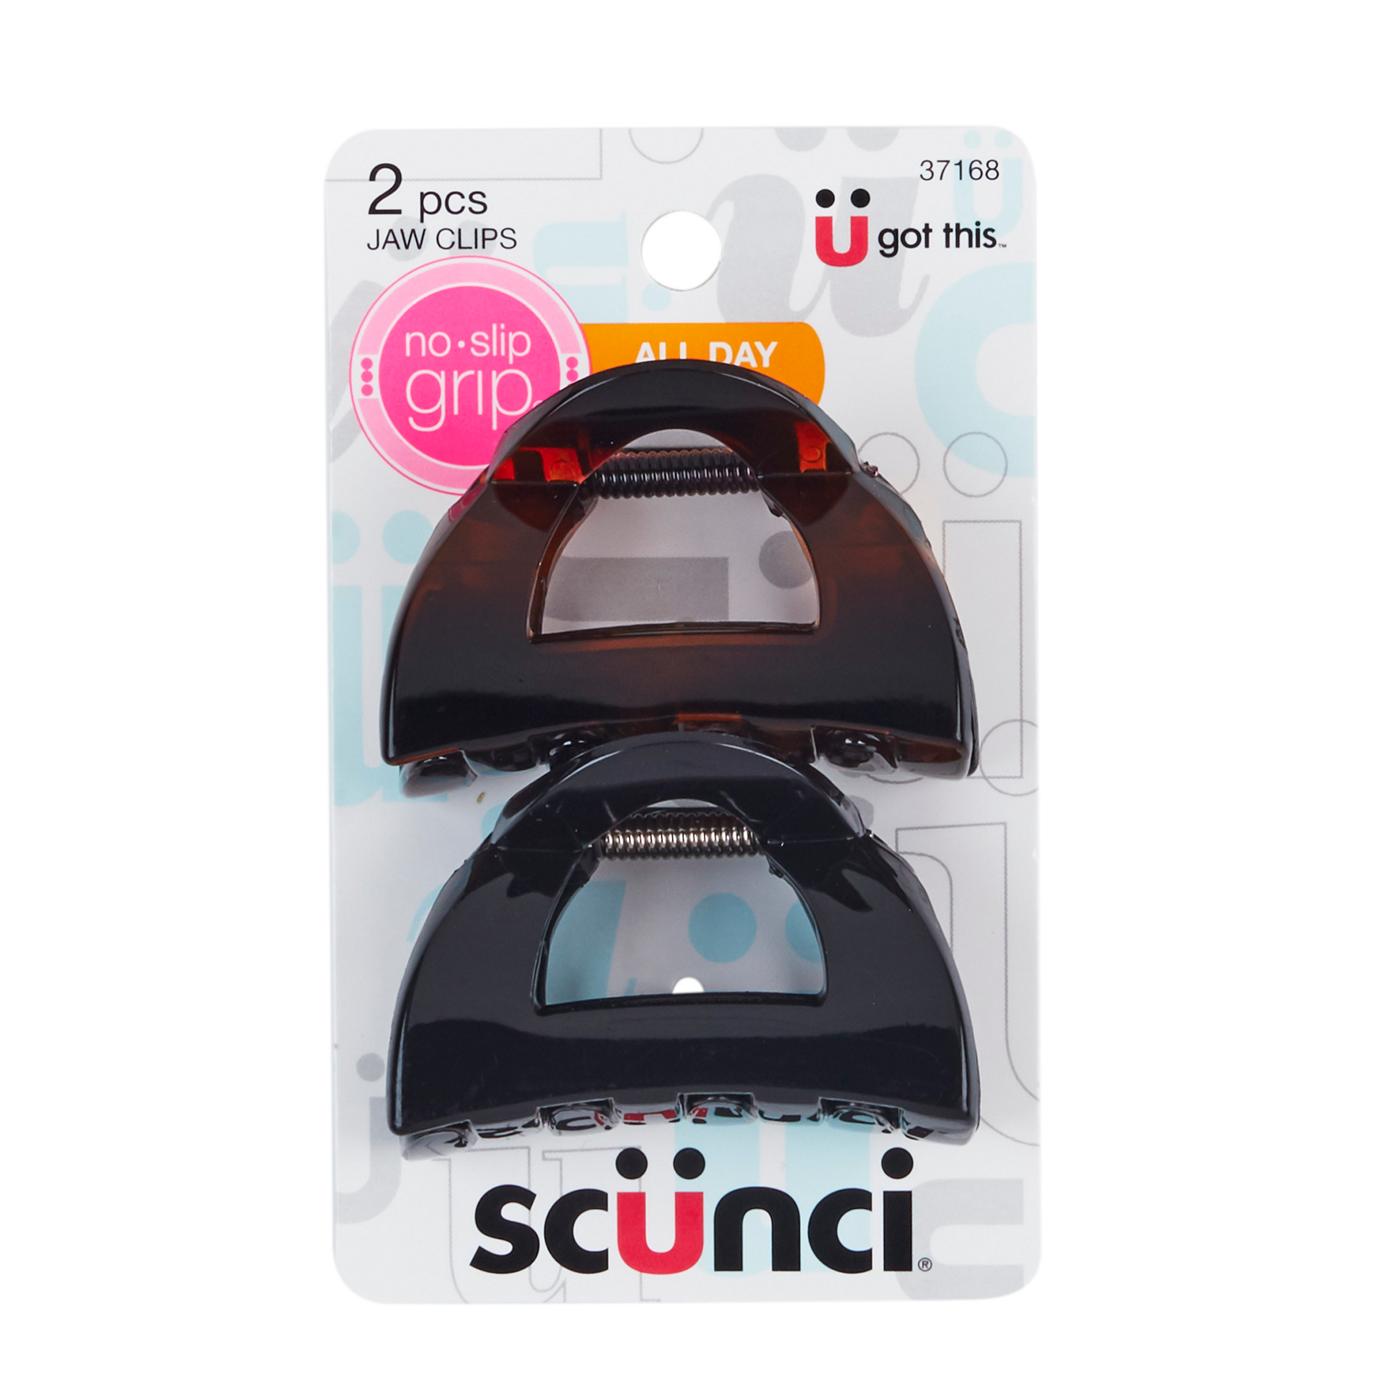 Scunci No-Slip Grip Jaw Clips; image 1 of 2